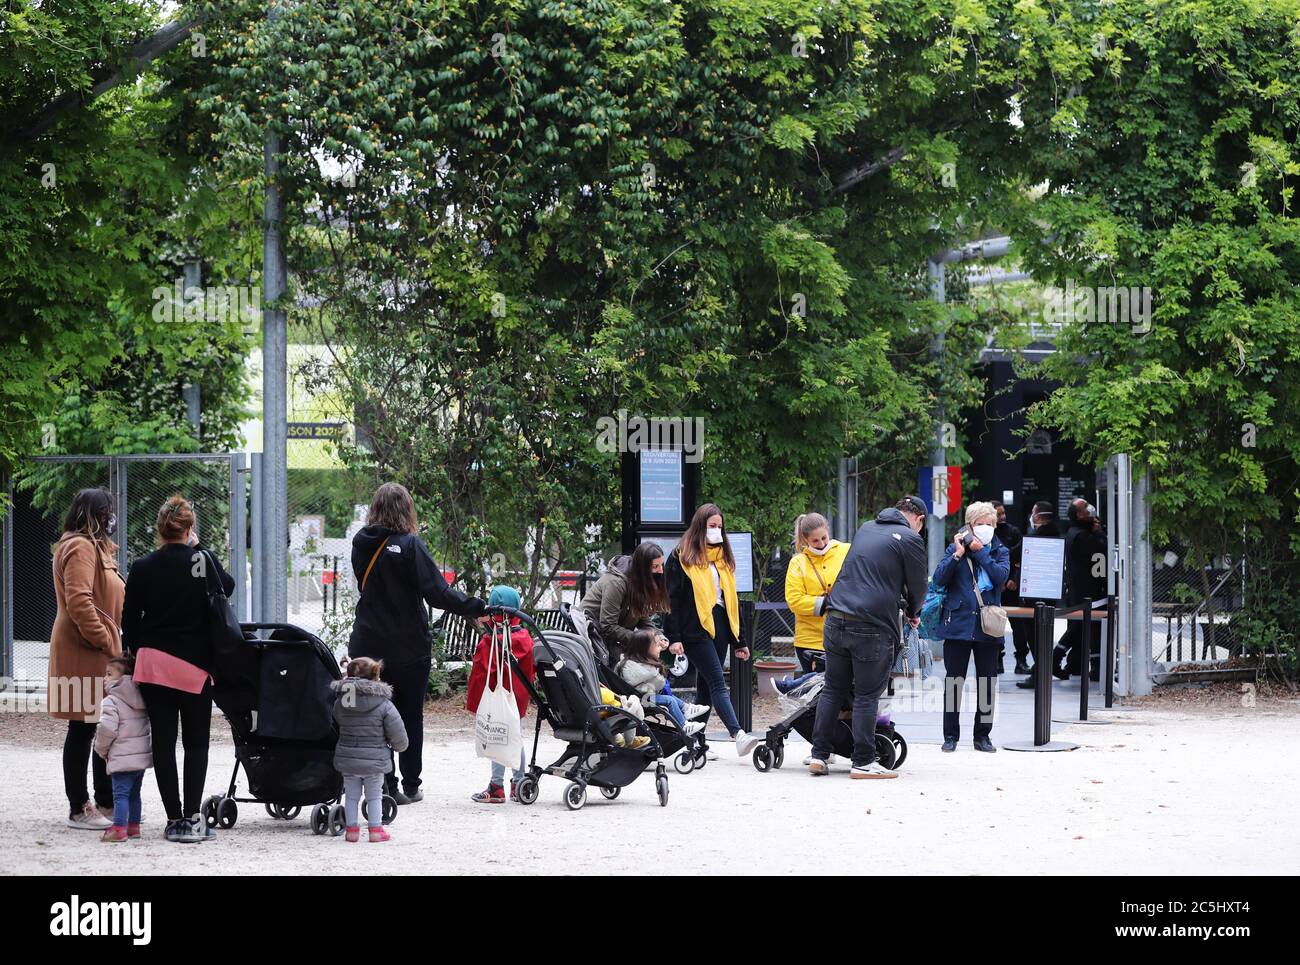 Paris, France. 9th June, 2020. People line up to visit the zoo in Paris, France, June 9, 2020. Two months into France's gradual exit from the COVID-19 lockdown, the circulation of the virus is now 'under control' in the country despite the recent identification of more than 200 new infection clusters, Health Minister Olivier Veran said Thursday. Credit: Gao Jing/Xinhua/Alamy Live News Stock Photo